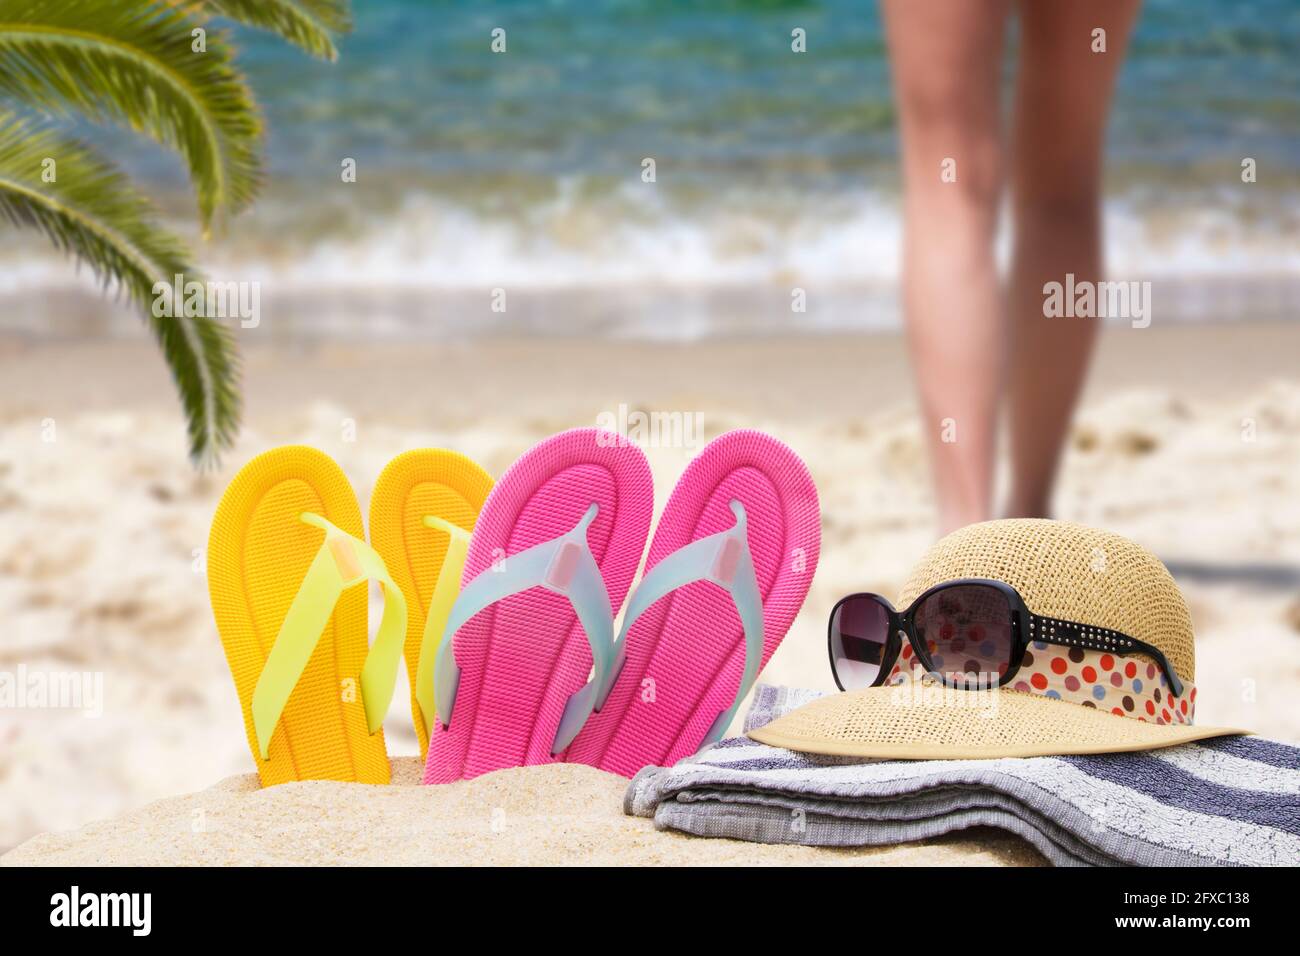 sandals on the beach, holiday and summer concept Stock Photo